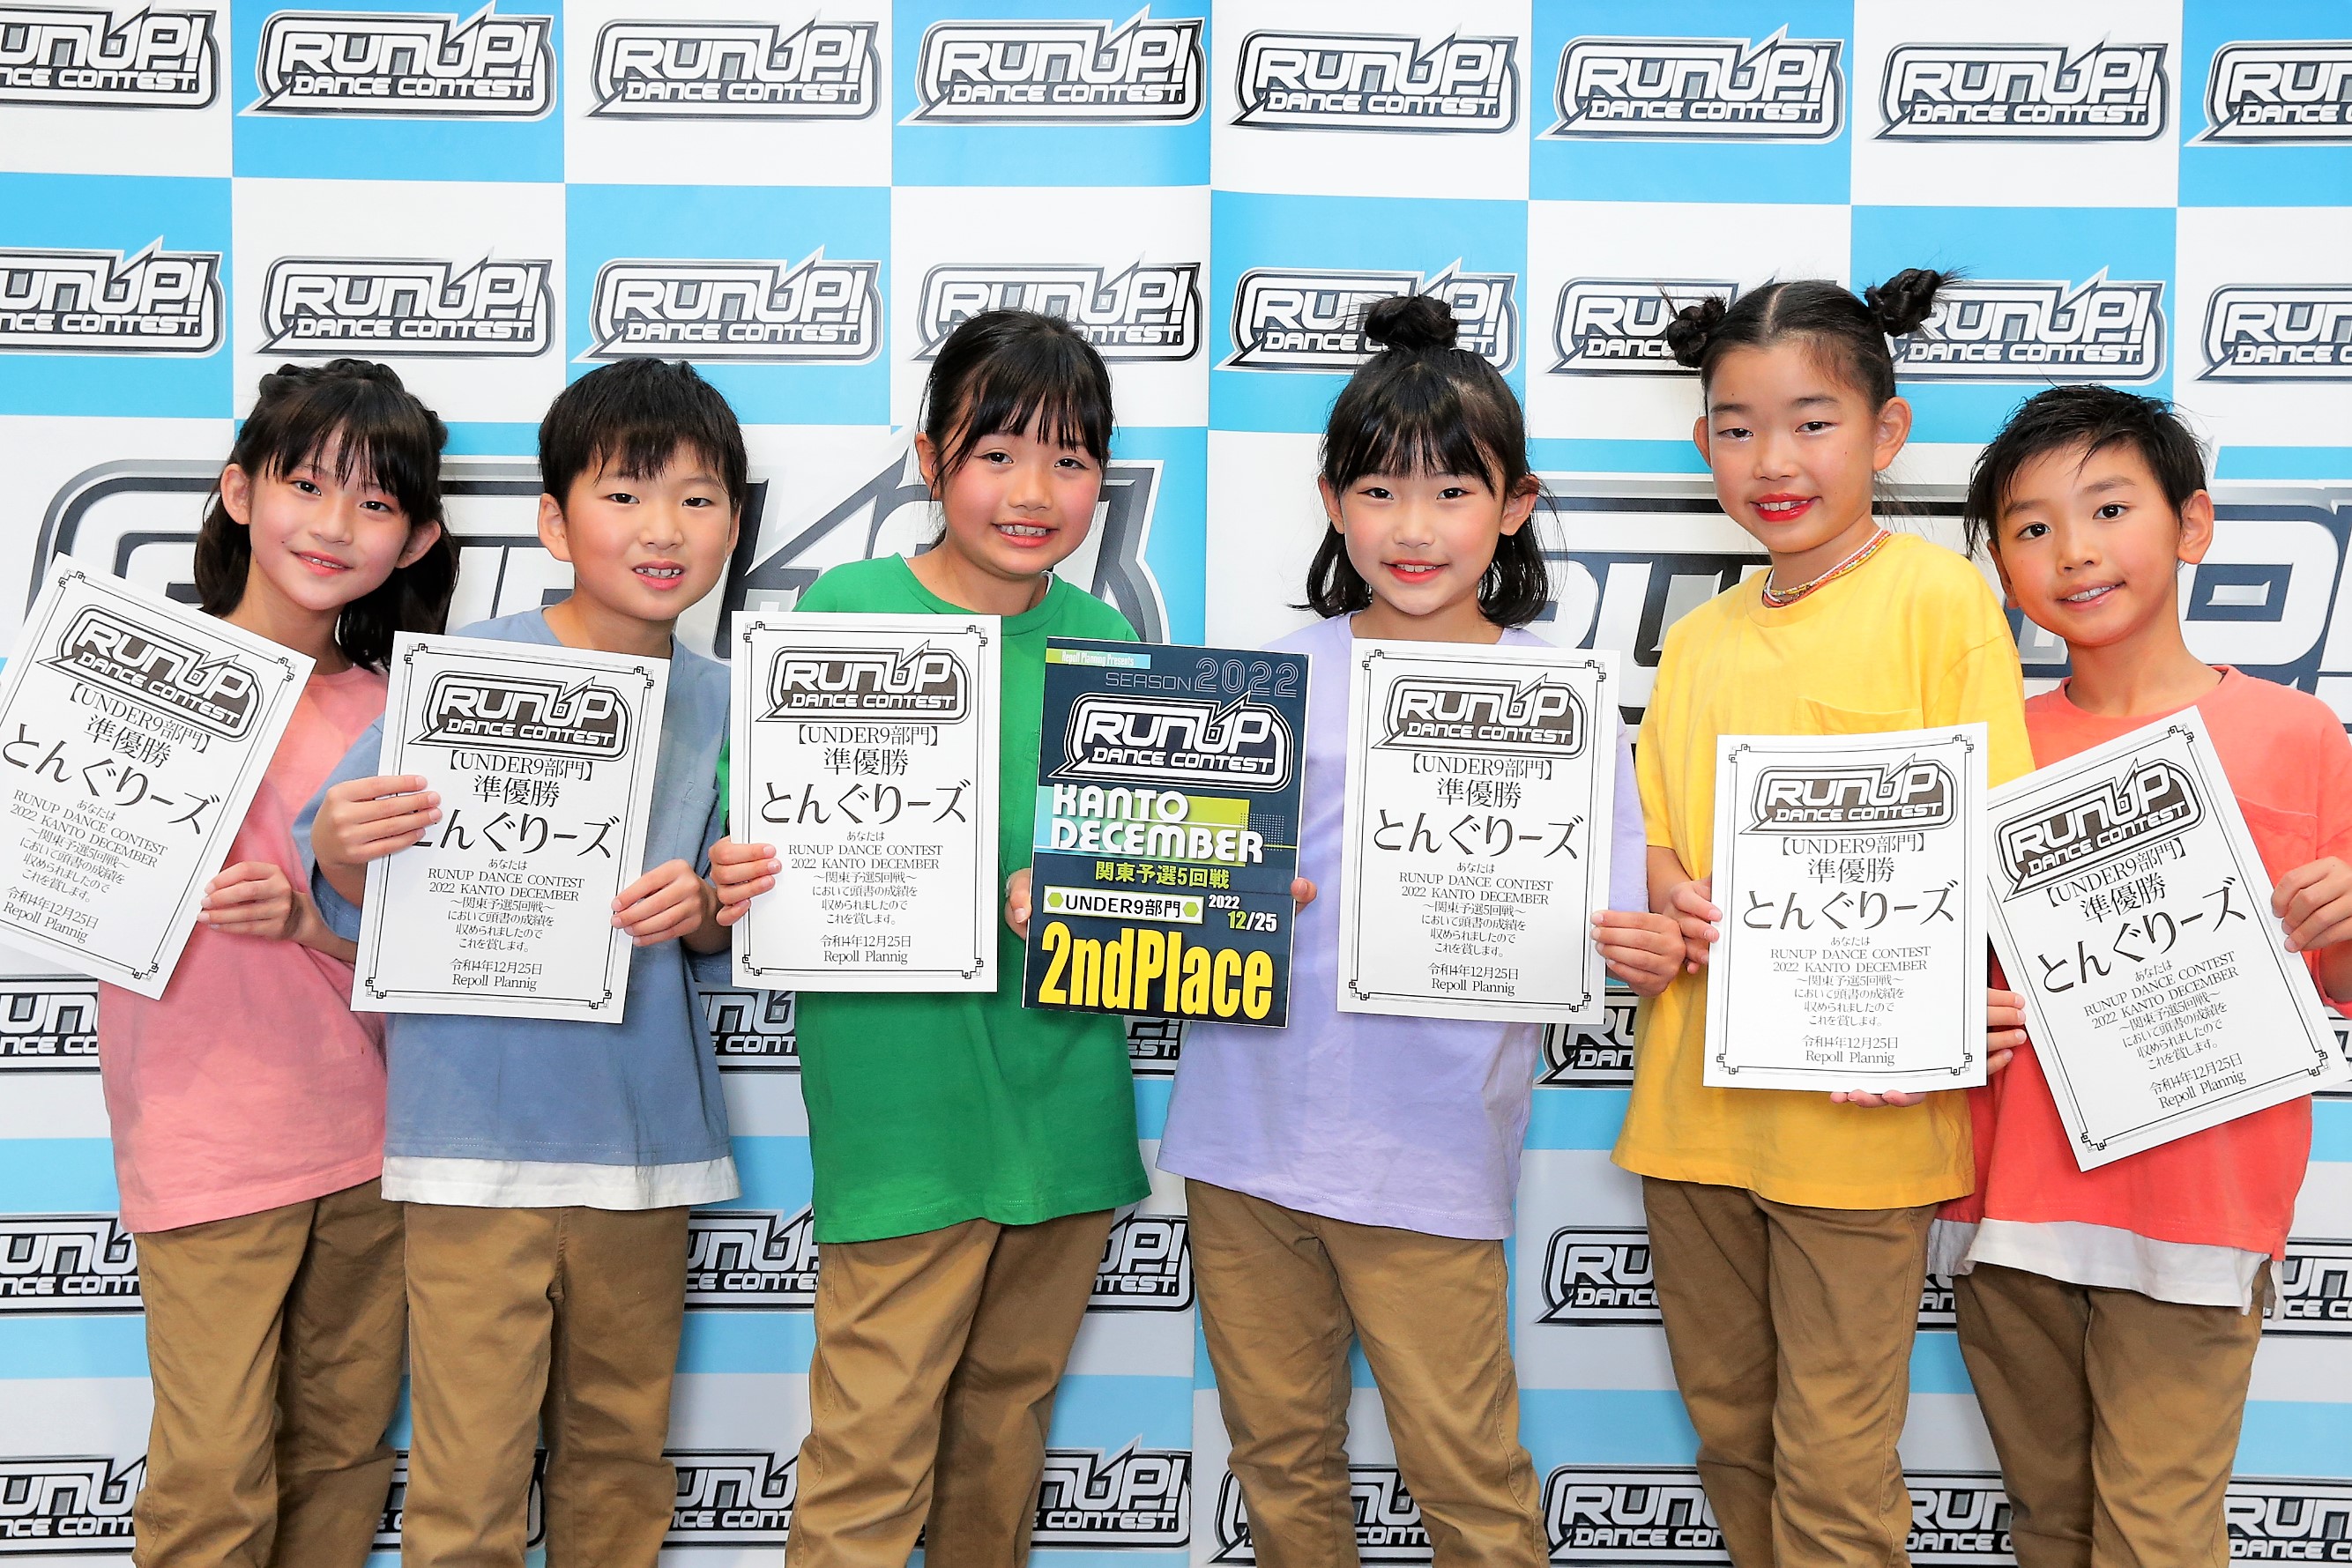 RUNUP 2022 KANTO DECEMBER UNDER9 準優勝 とんぐりーズ